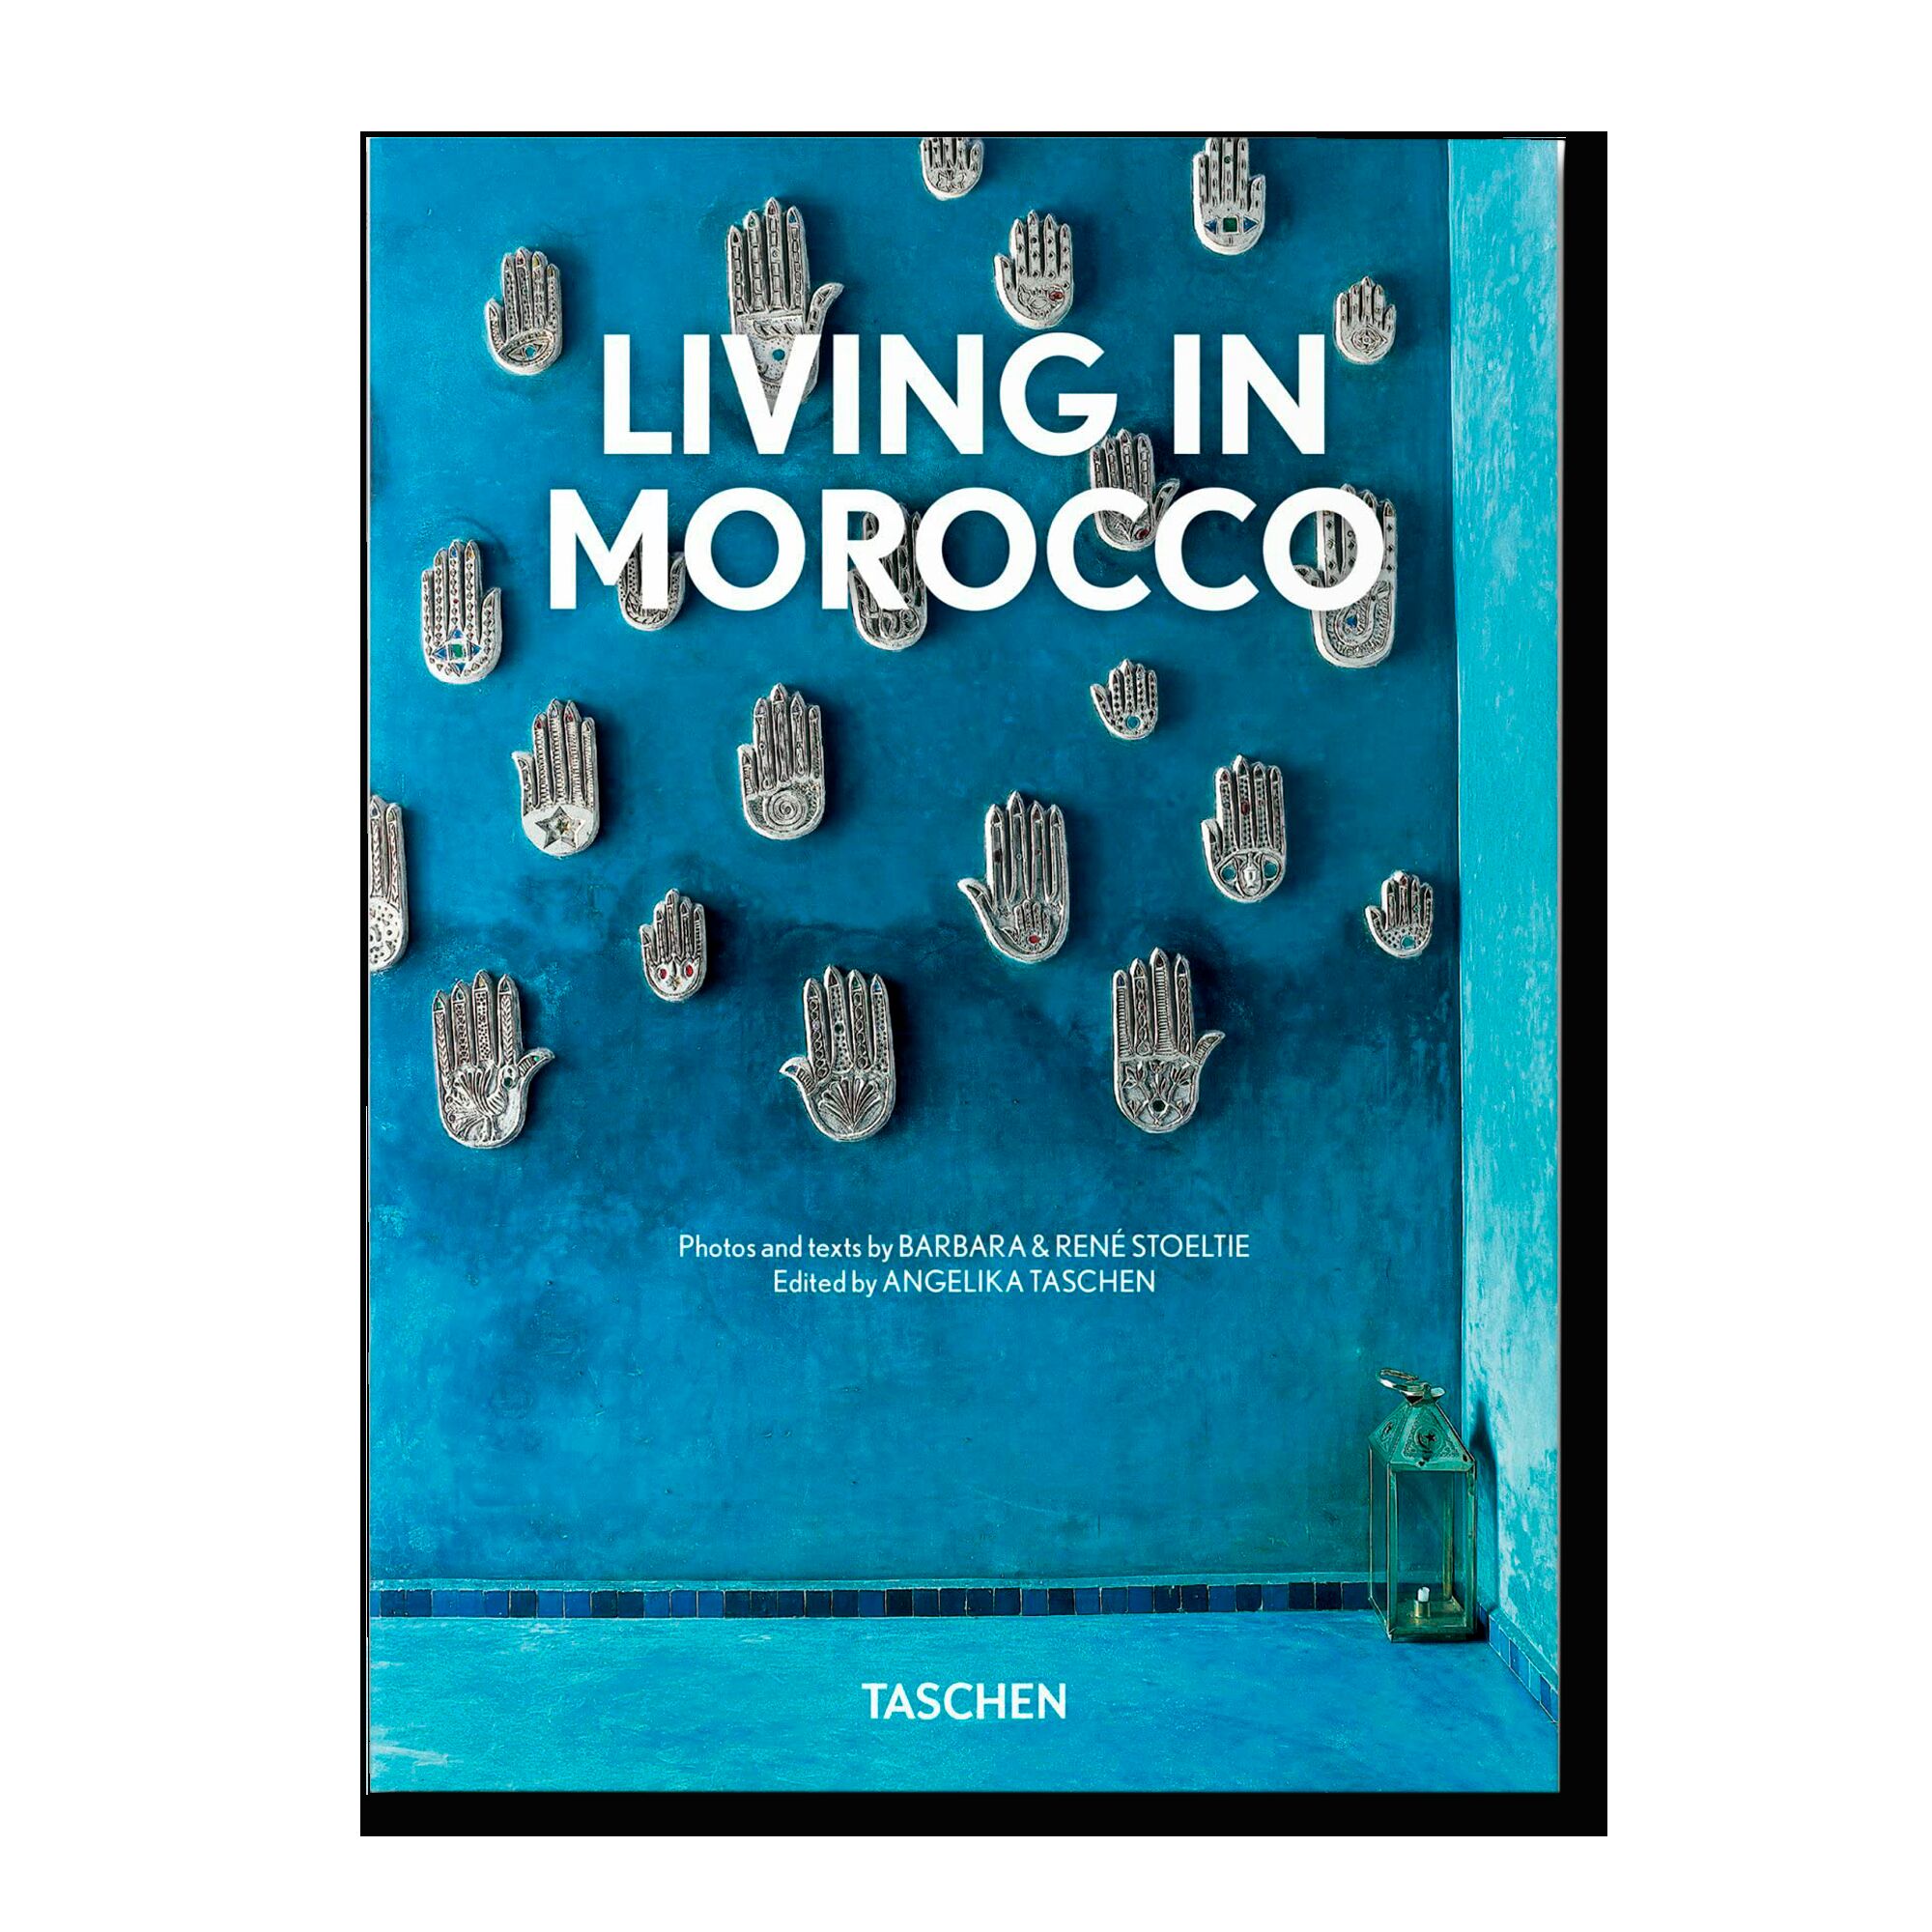 Living in Morocco (40th Anniversary Edition)